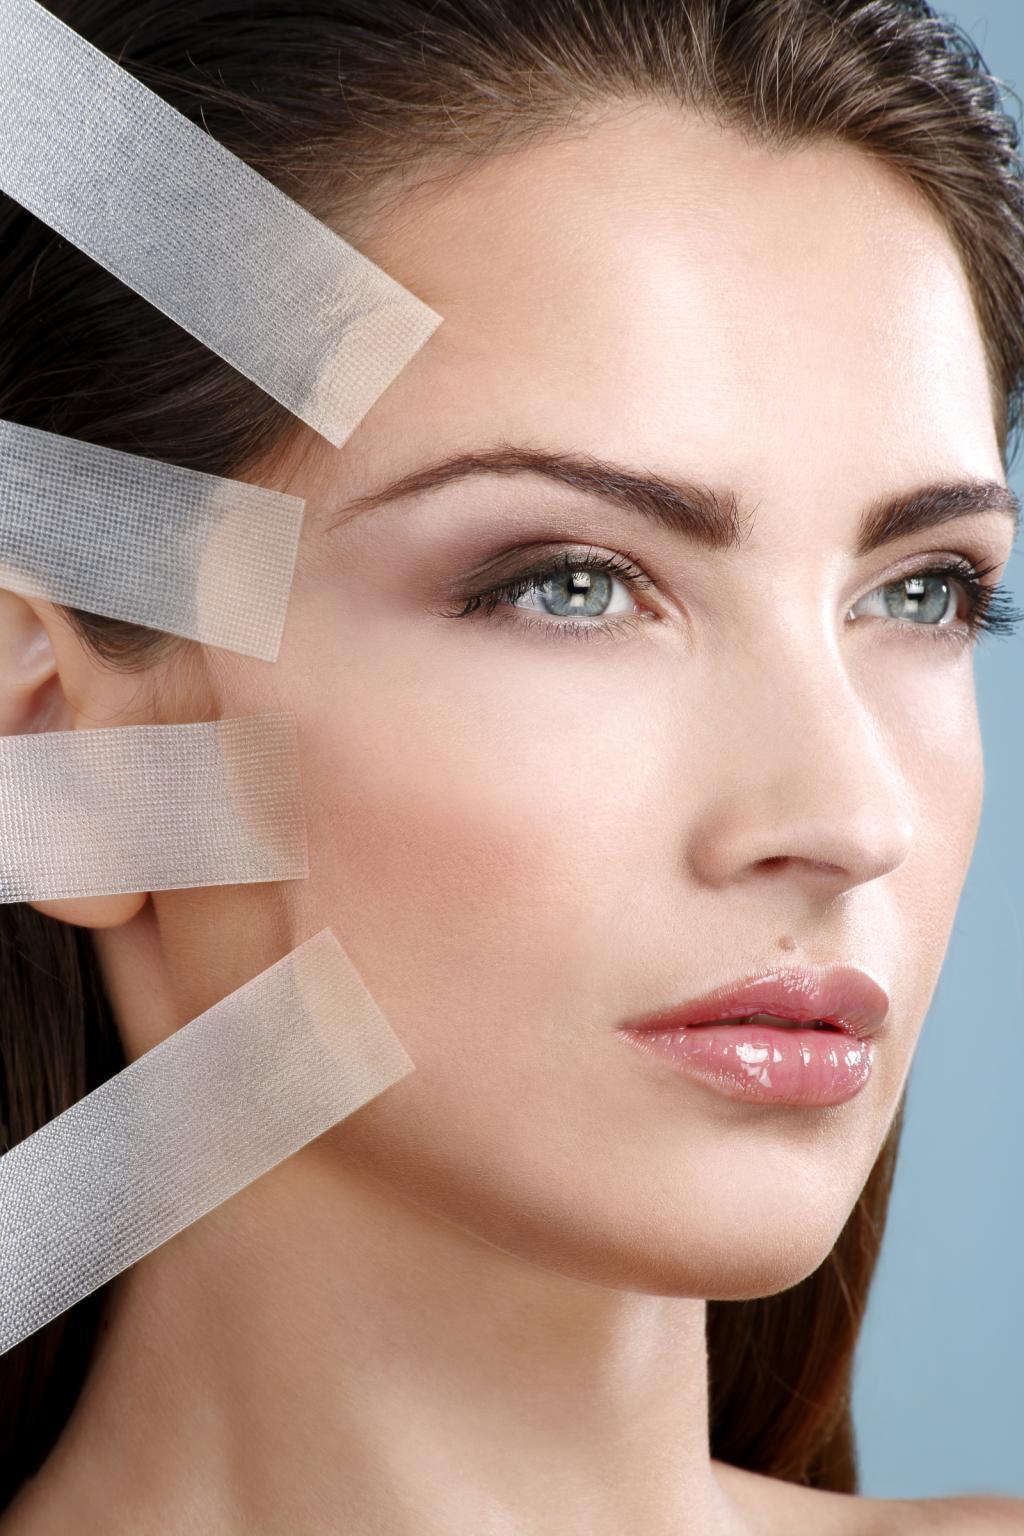 Thread Lifting Method With Face Lift